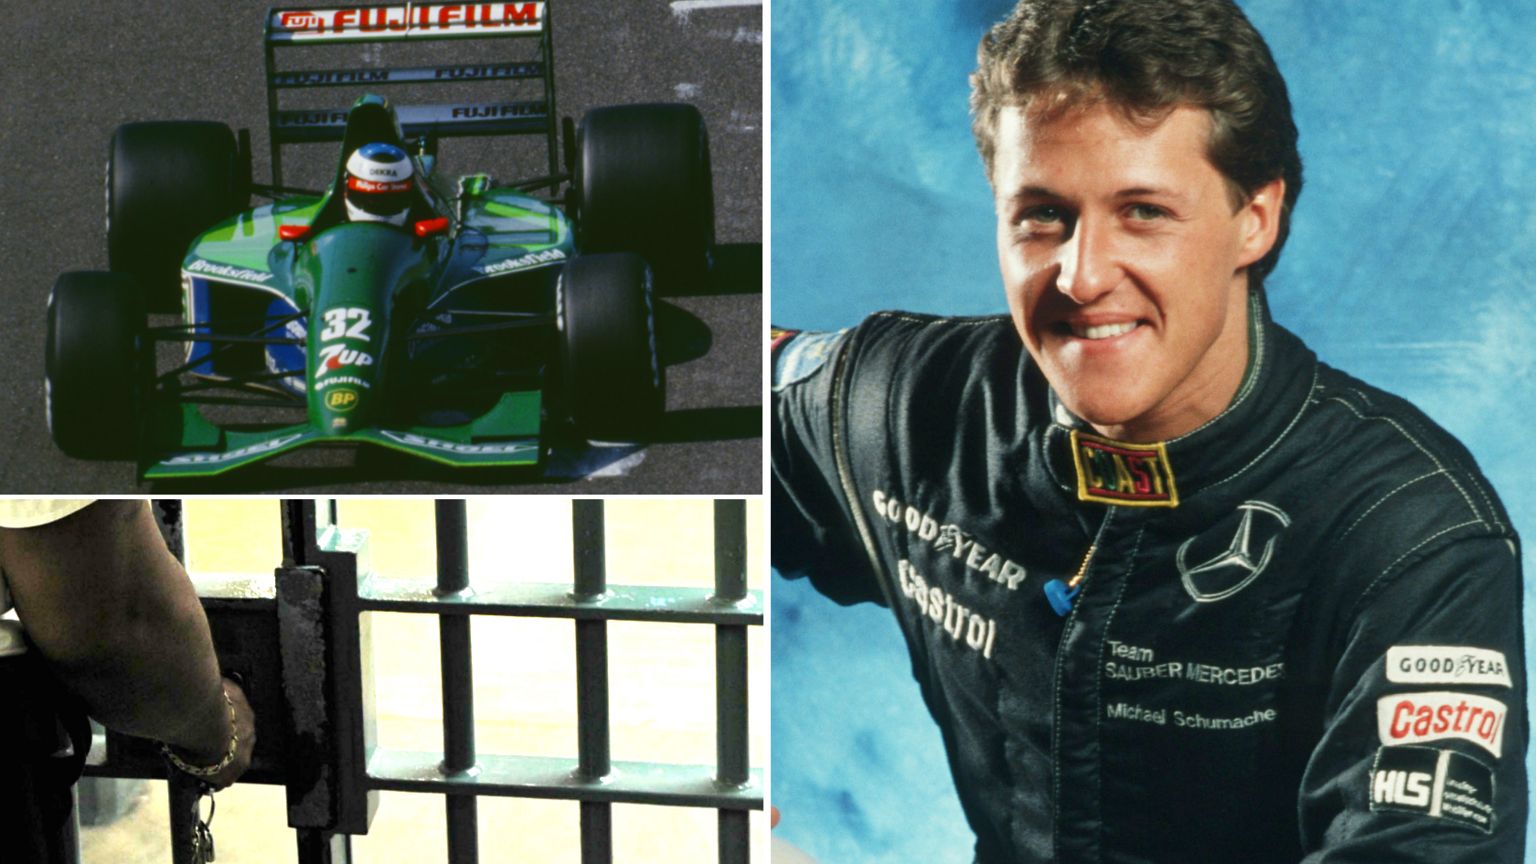 Michael Schumacher in his early racing career and an image of a prison cell